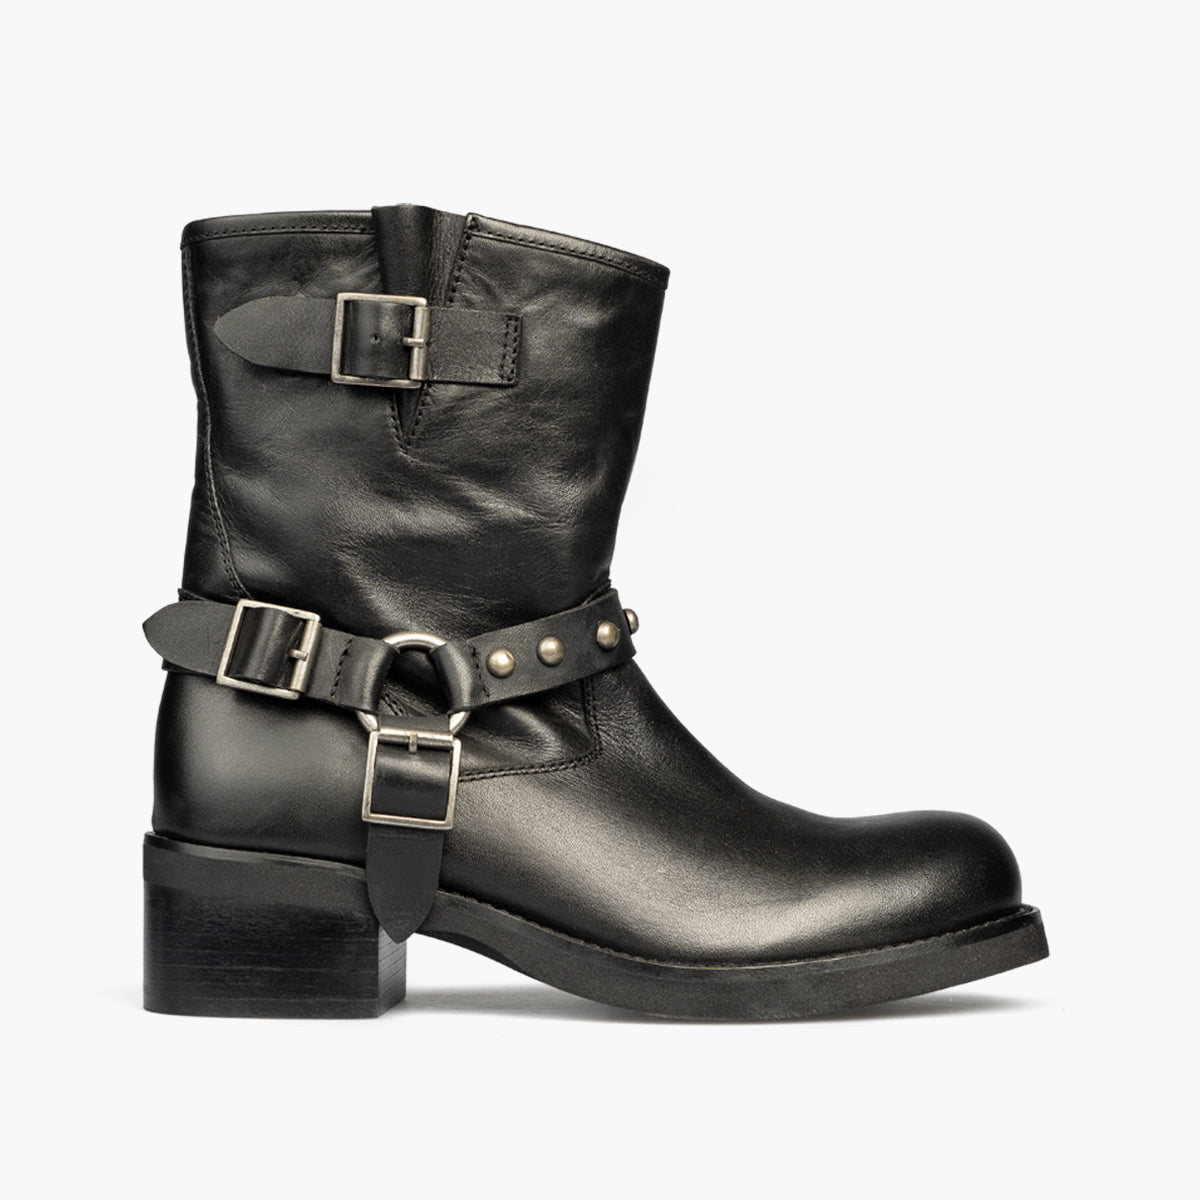 Tronchetto Fryes Boot Emanuelle Vee